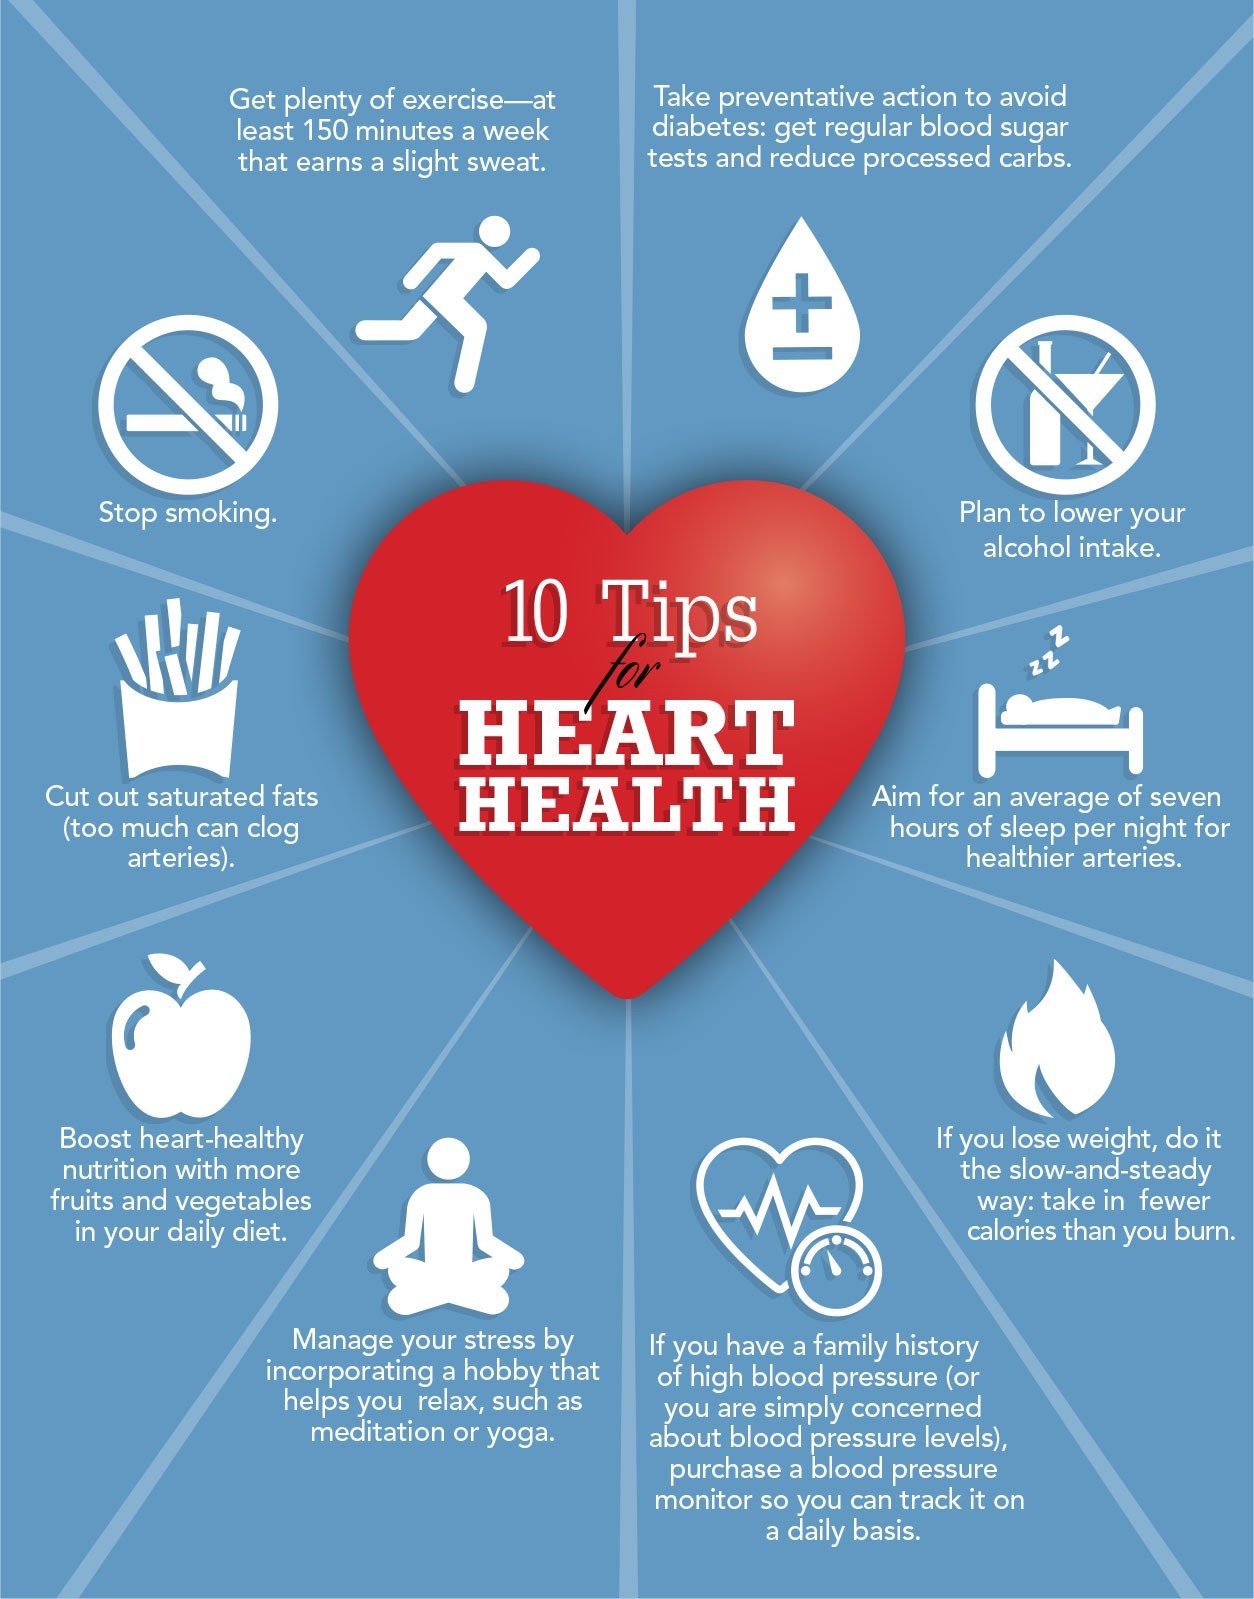 Heart health promotion tips